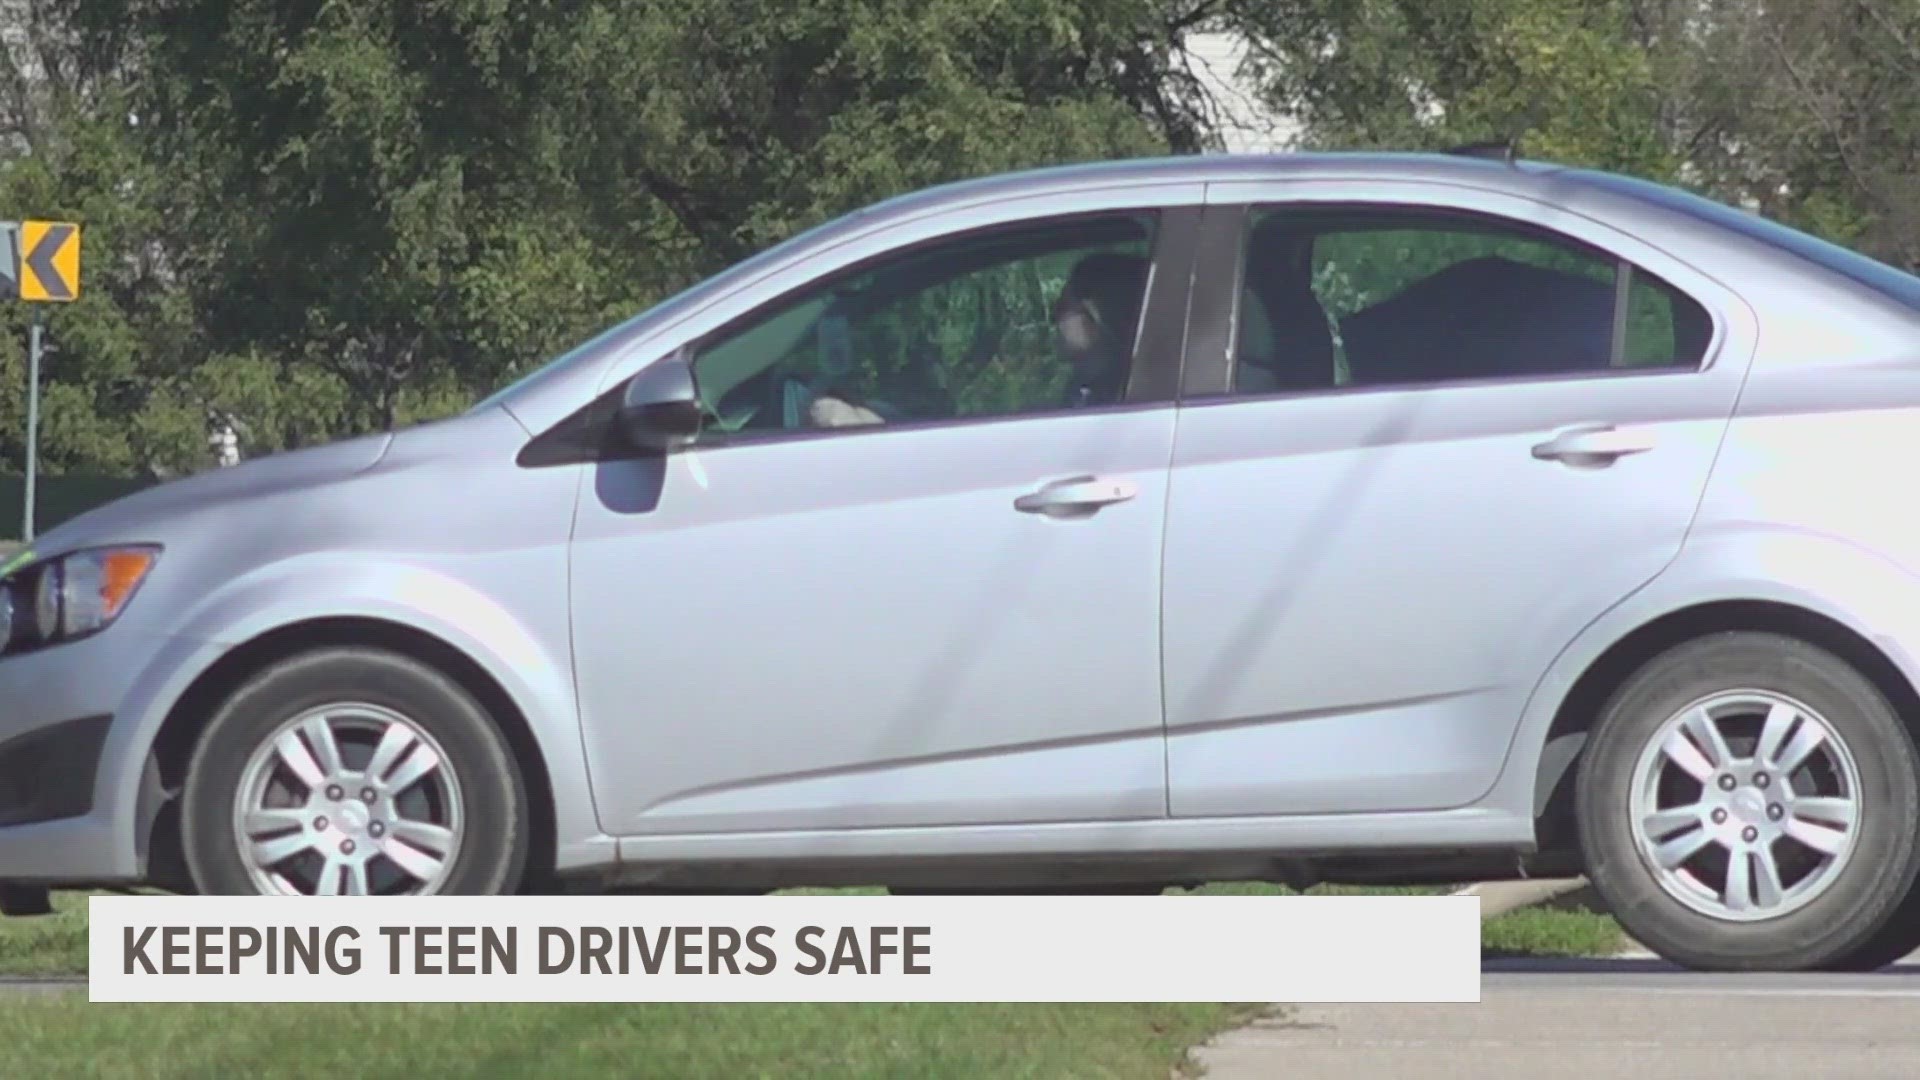 Teens in Iowa and professionals alike are speaking out about safety while driving this National Teen Driver Safety Week.